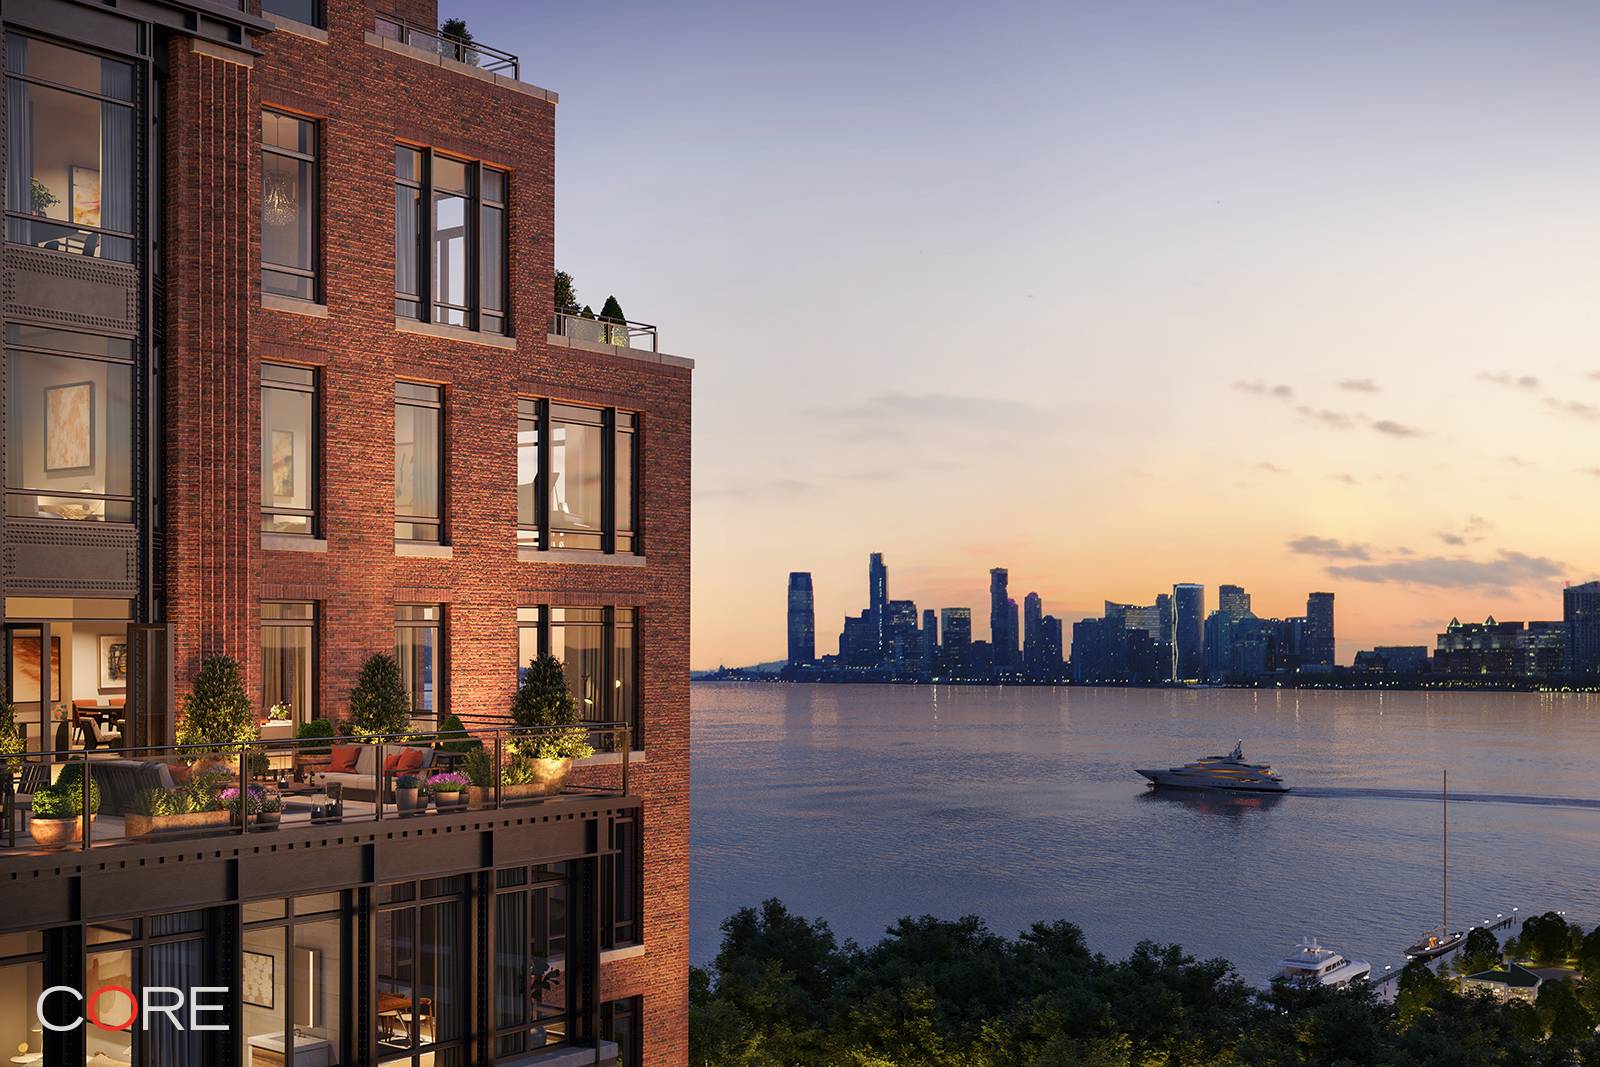 Inspired by West Chelsea s historical architecture and rich heritage, The Cortland, located at 555 W 22nd Street, is striking a new presence on the Hudson waterfront.